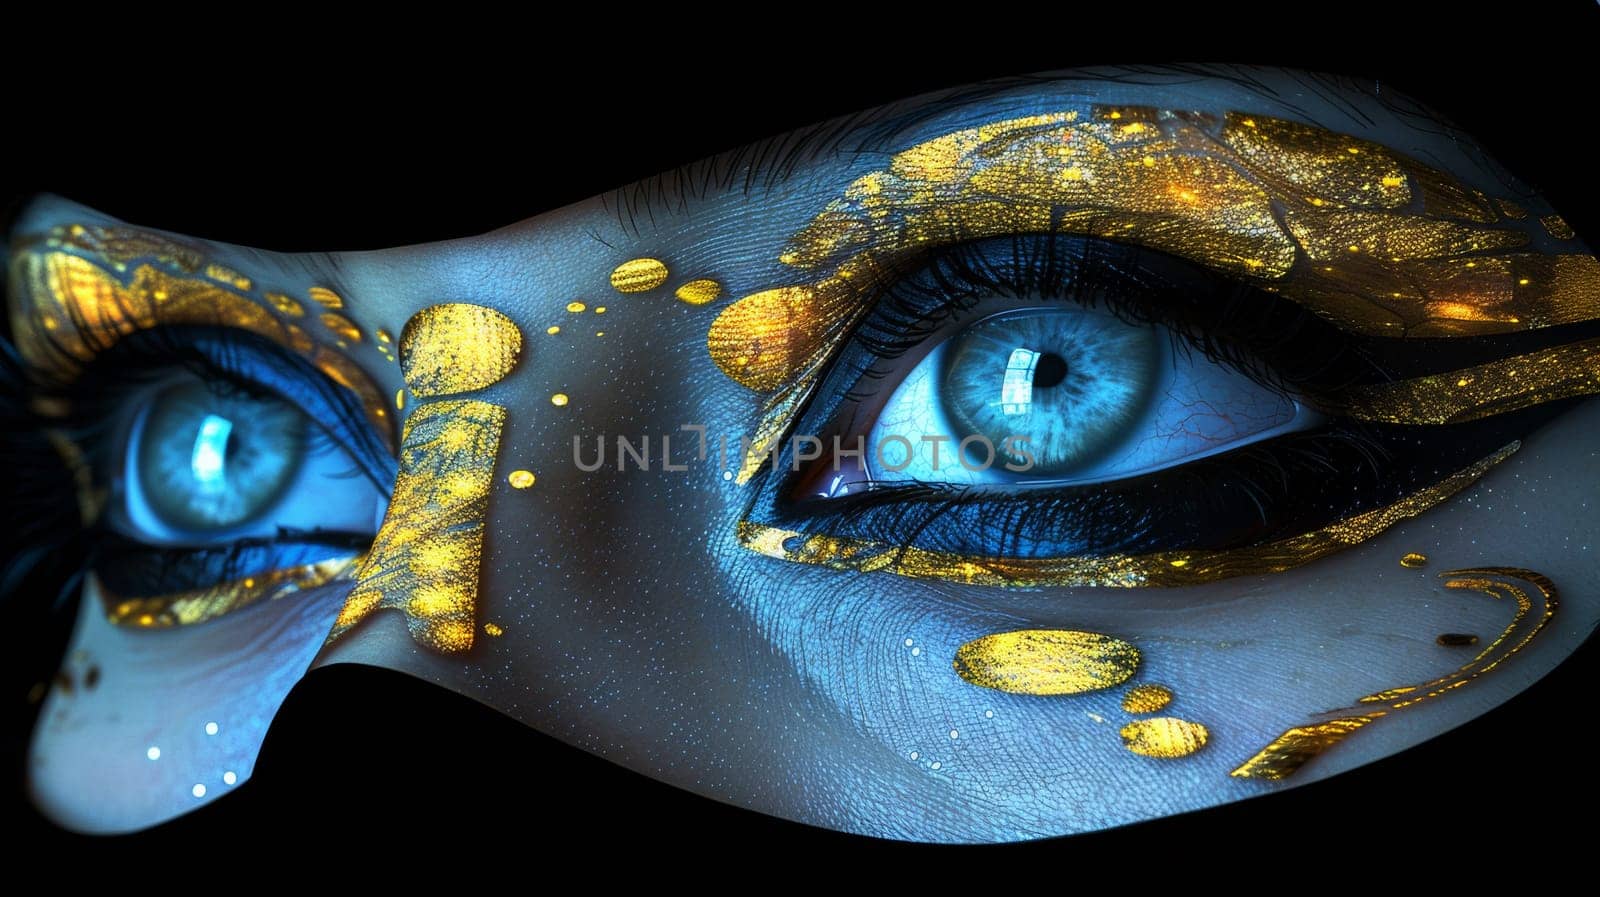 A close up of a woman's face with gold and blue eyes